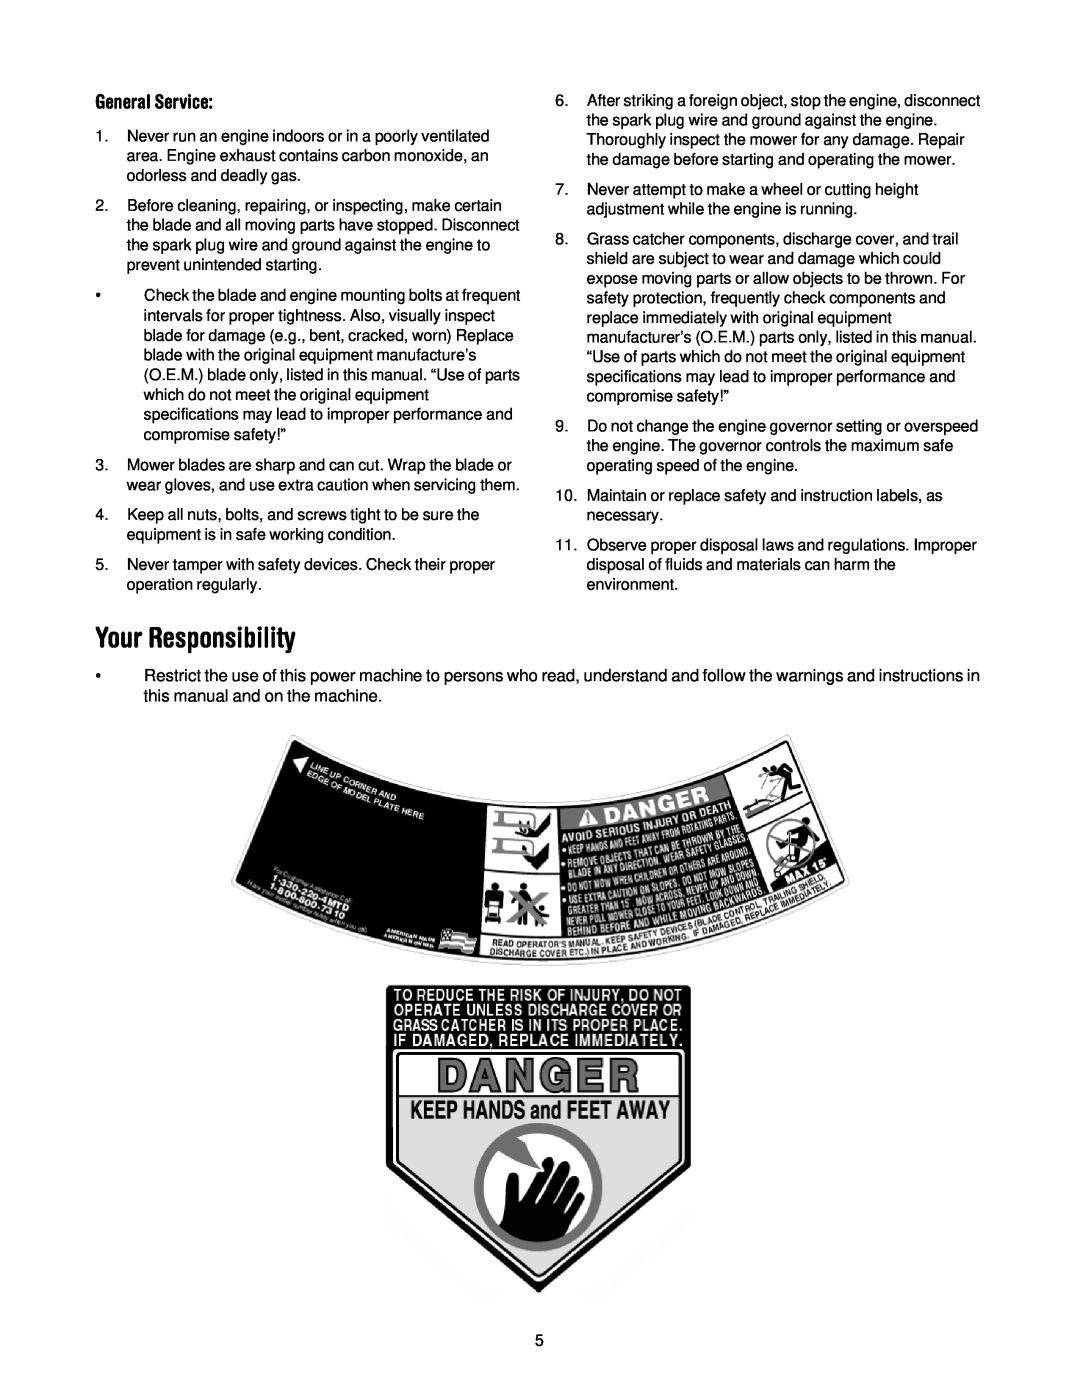 MTD Series 070 manual Your Responsibility, General Service 